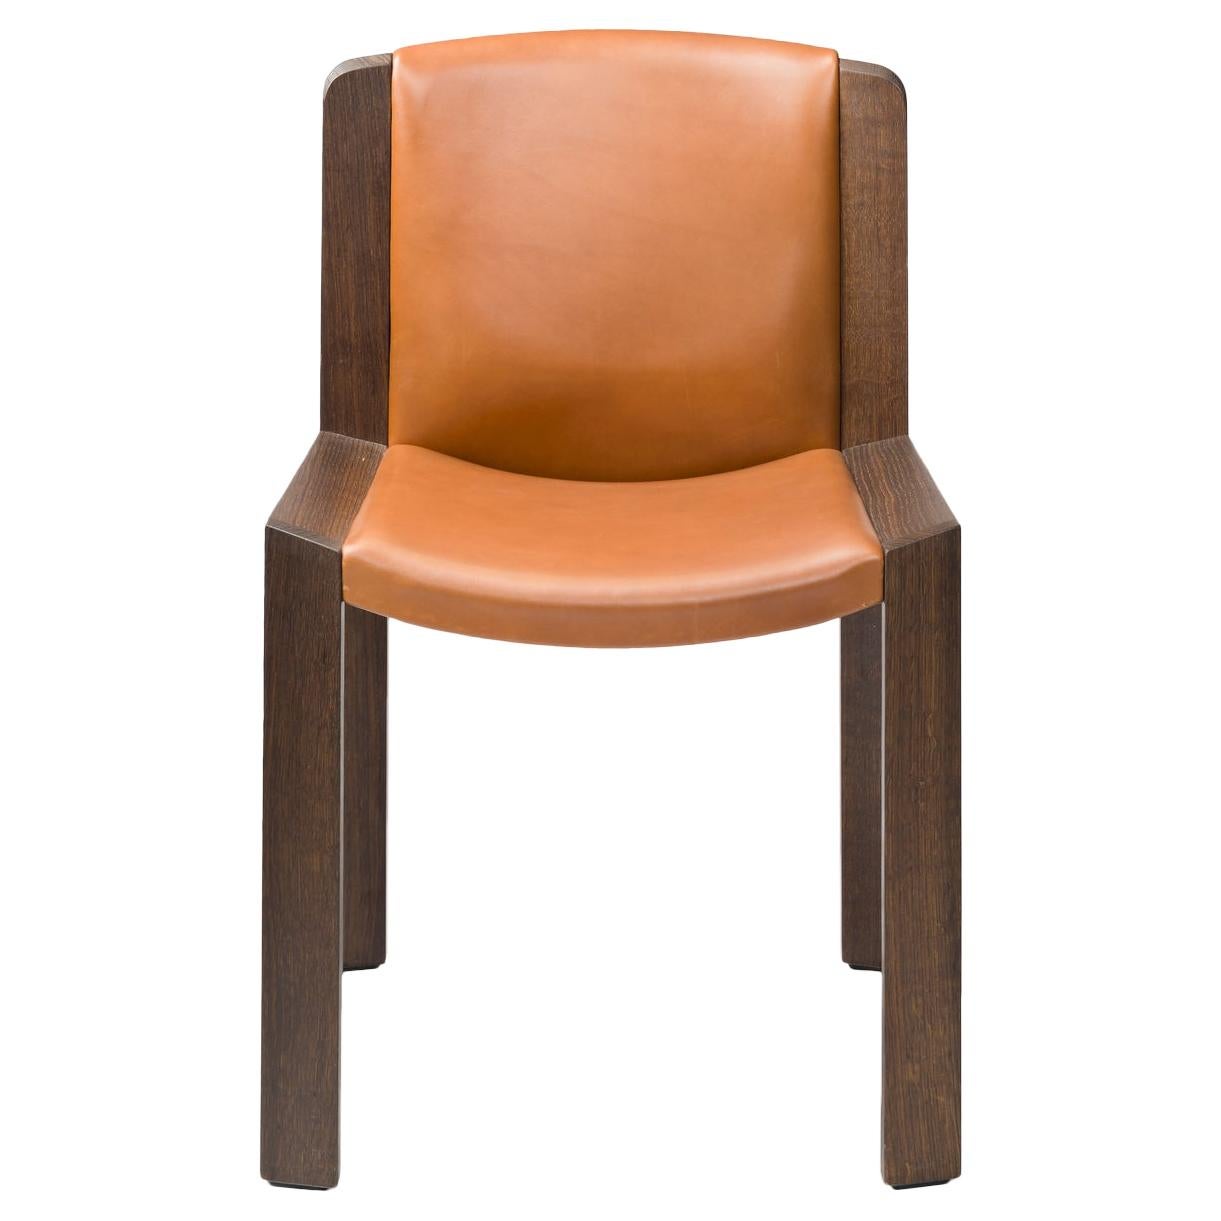 Joe Colombo 'Chair 300' Wood and Sørensen Leather Chair by Karakter For Sale